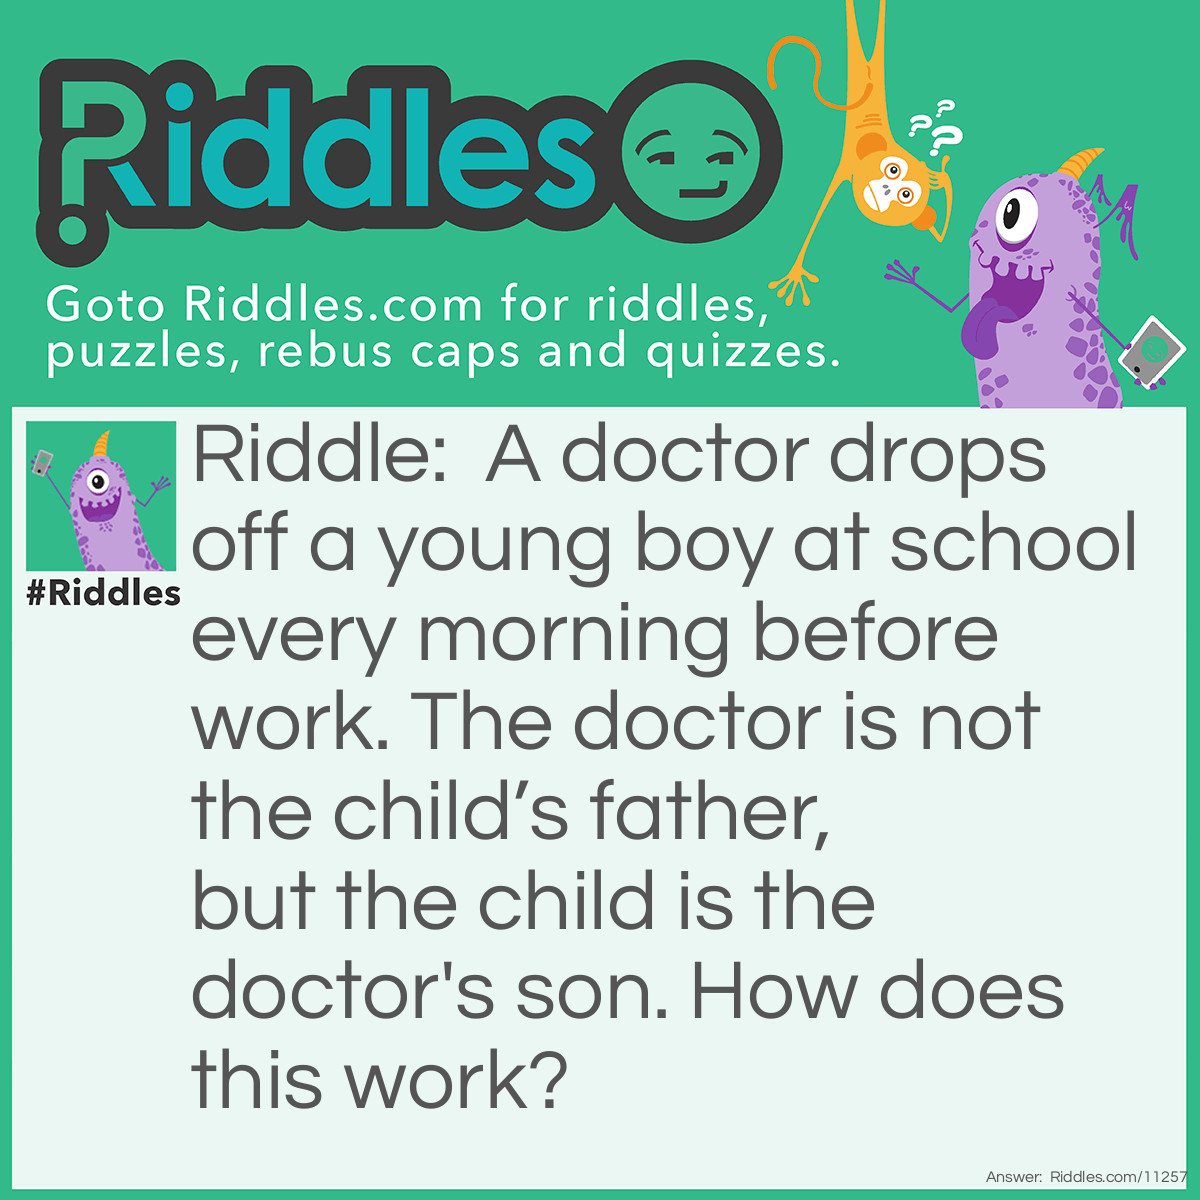 Riddle: A doctor drops off a young boy at school every morning before work. The doctor is not the child’s father, but the child is the doctor's son. How does this work? Answer: The Doctor is the boy's mother!